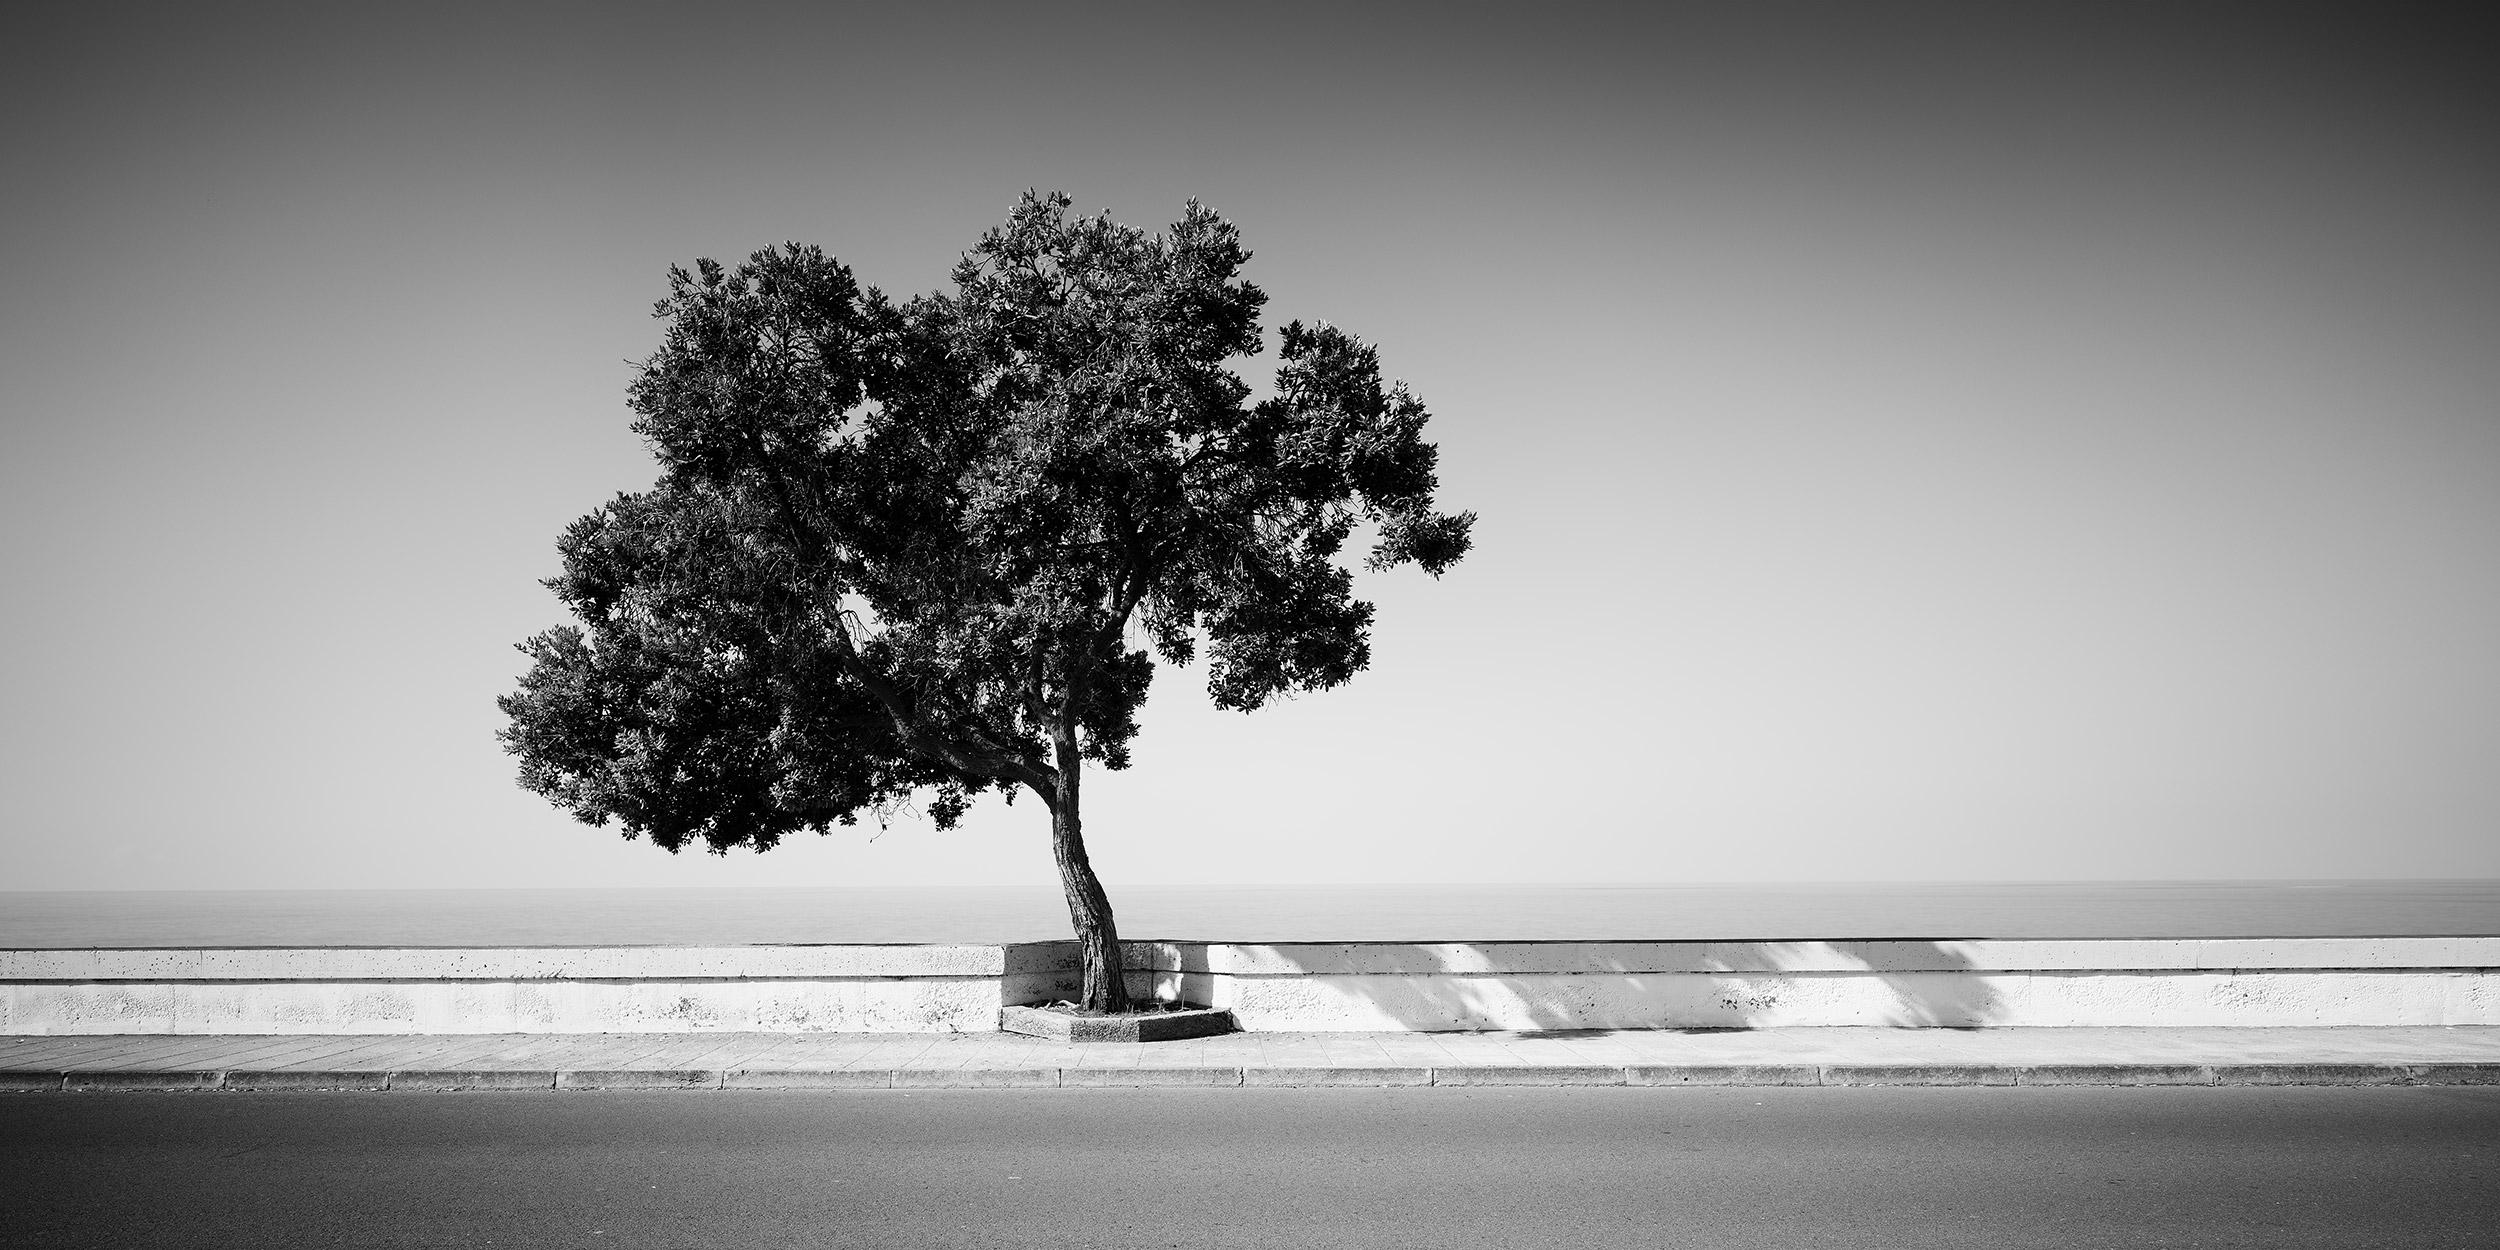 Gerald Berghammer Landscape Photograph - Tree on the Waterfront, Portugal, black and white photography, art landscape